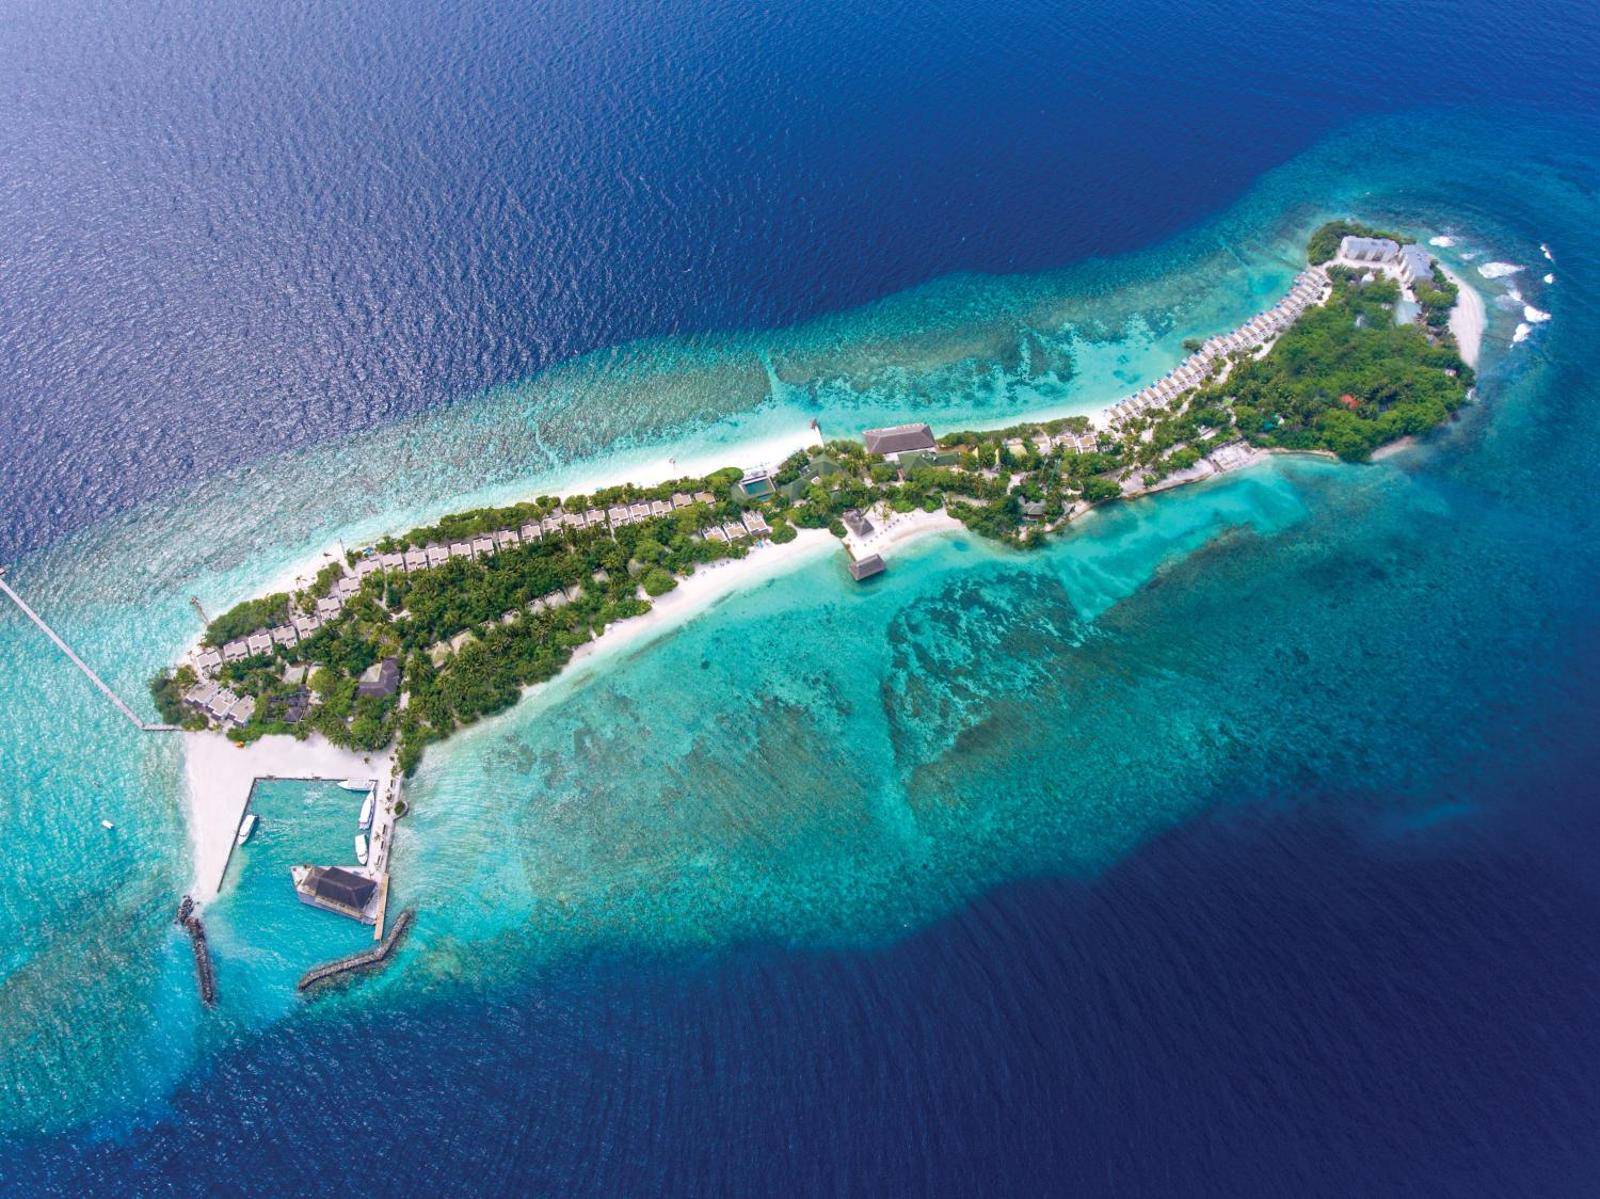 Oblu experience ailafushi. OBLU nature Helengeli 4 Мальдивы. OBLU by atmosphere at Helengeli 4*. OBLU by atmosphere at Helengeli Maldives. OBLU Xperience ailafushi 4 Мальдивы.